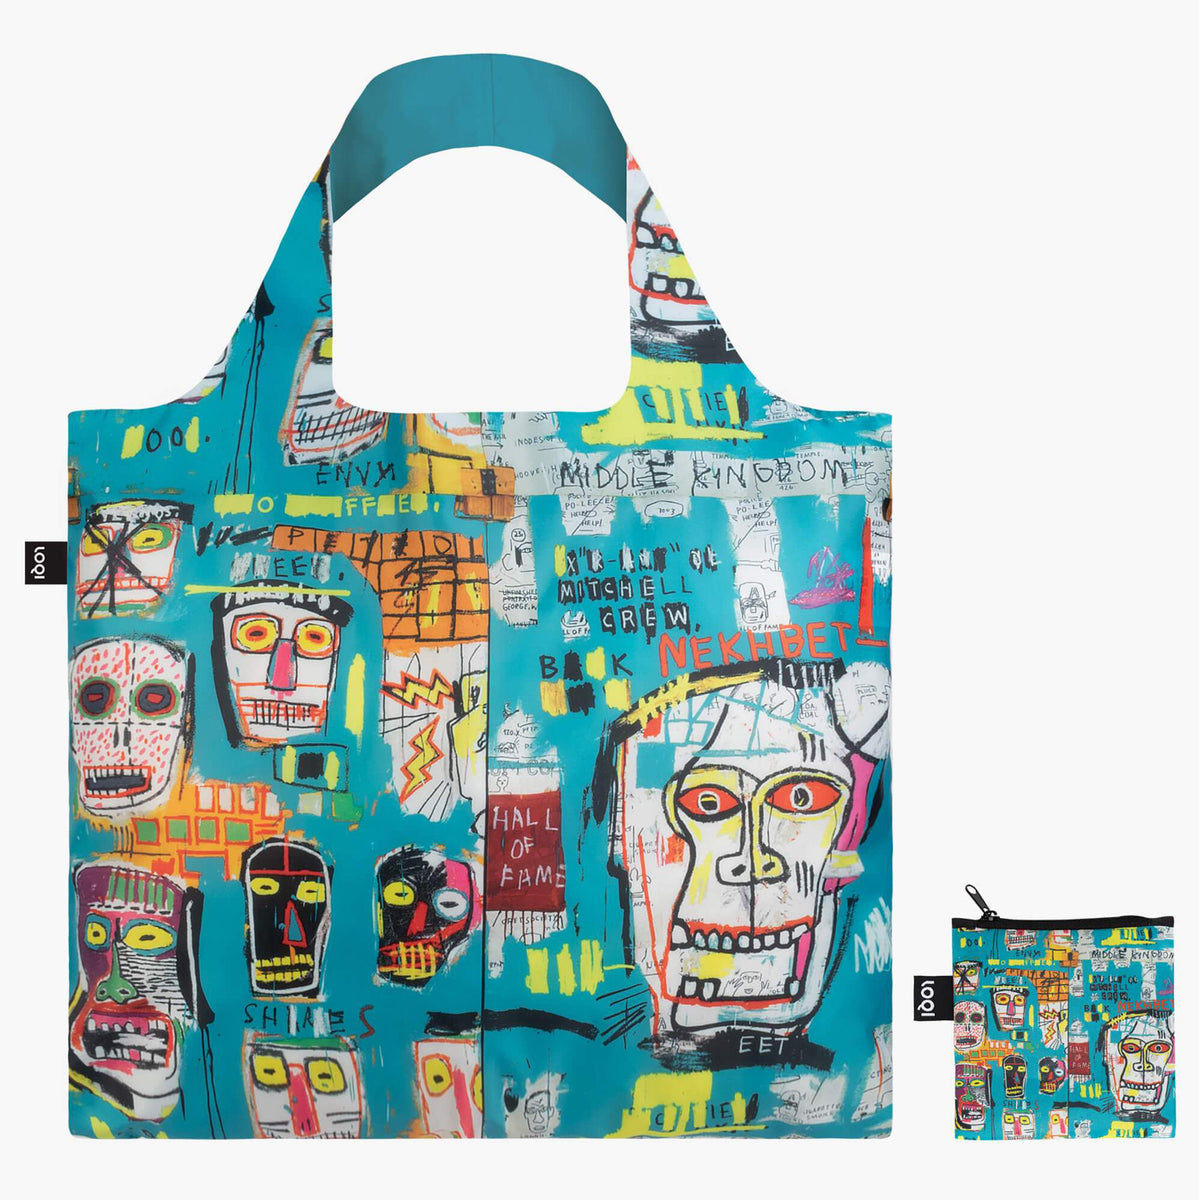 The Basquiat Skull Tote and and included zip pouch.